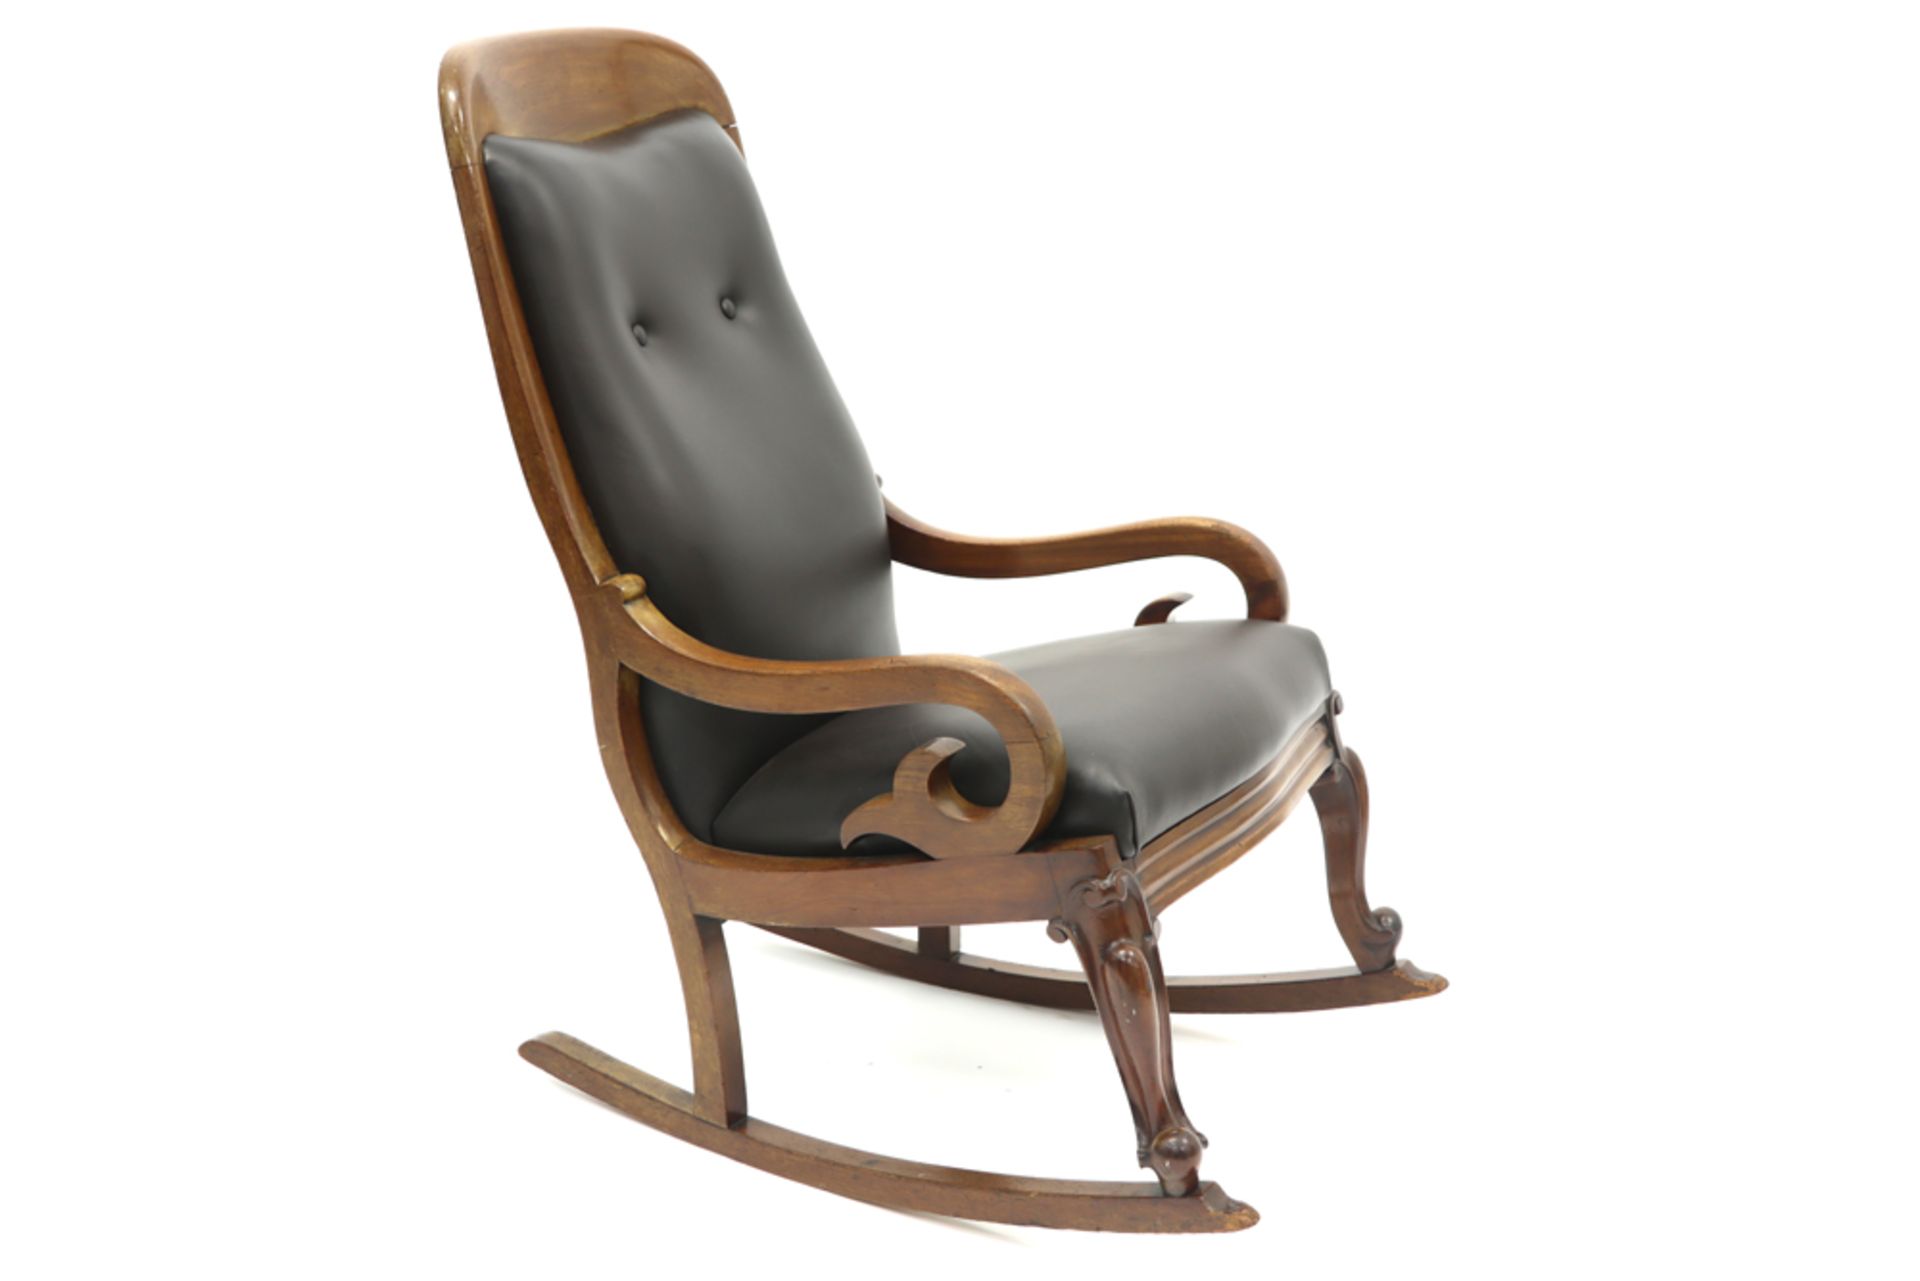 antique mahogany rocking chair with leather upholstery||Antieke schommelstoel in acajou met